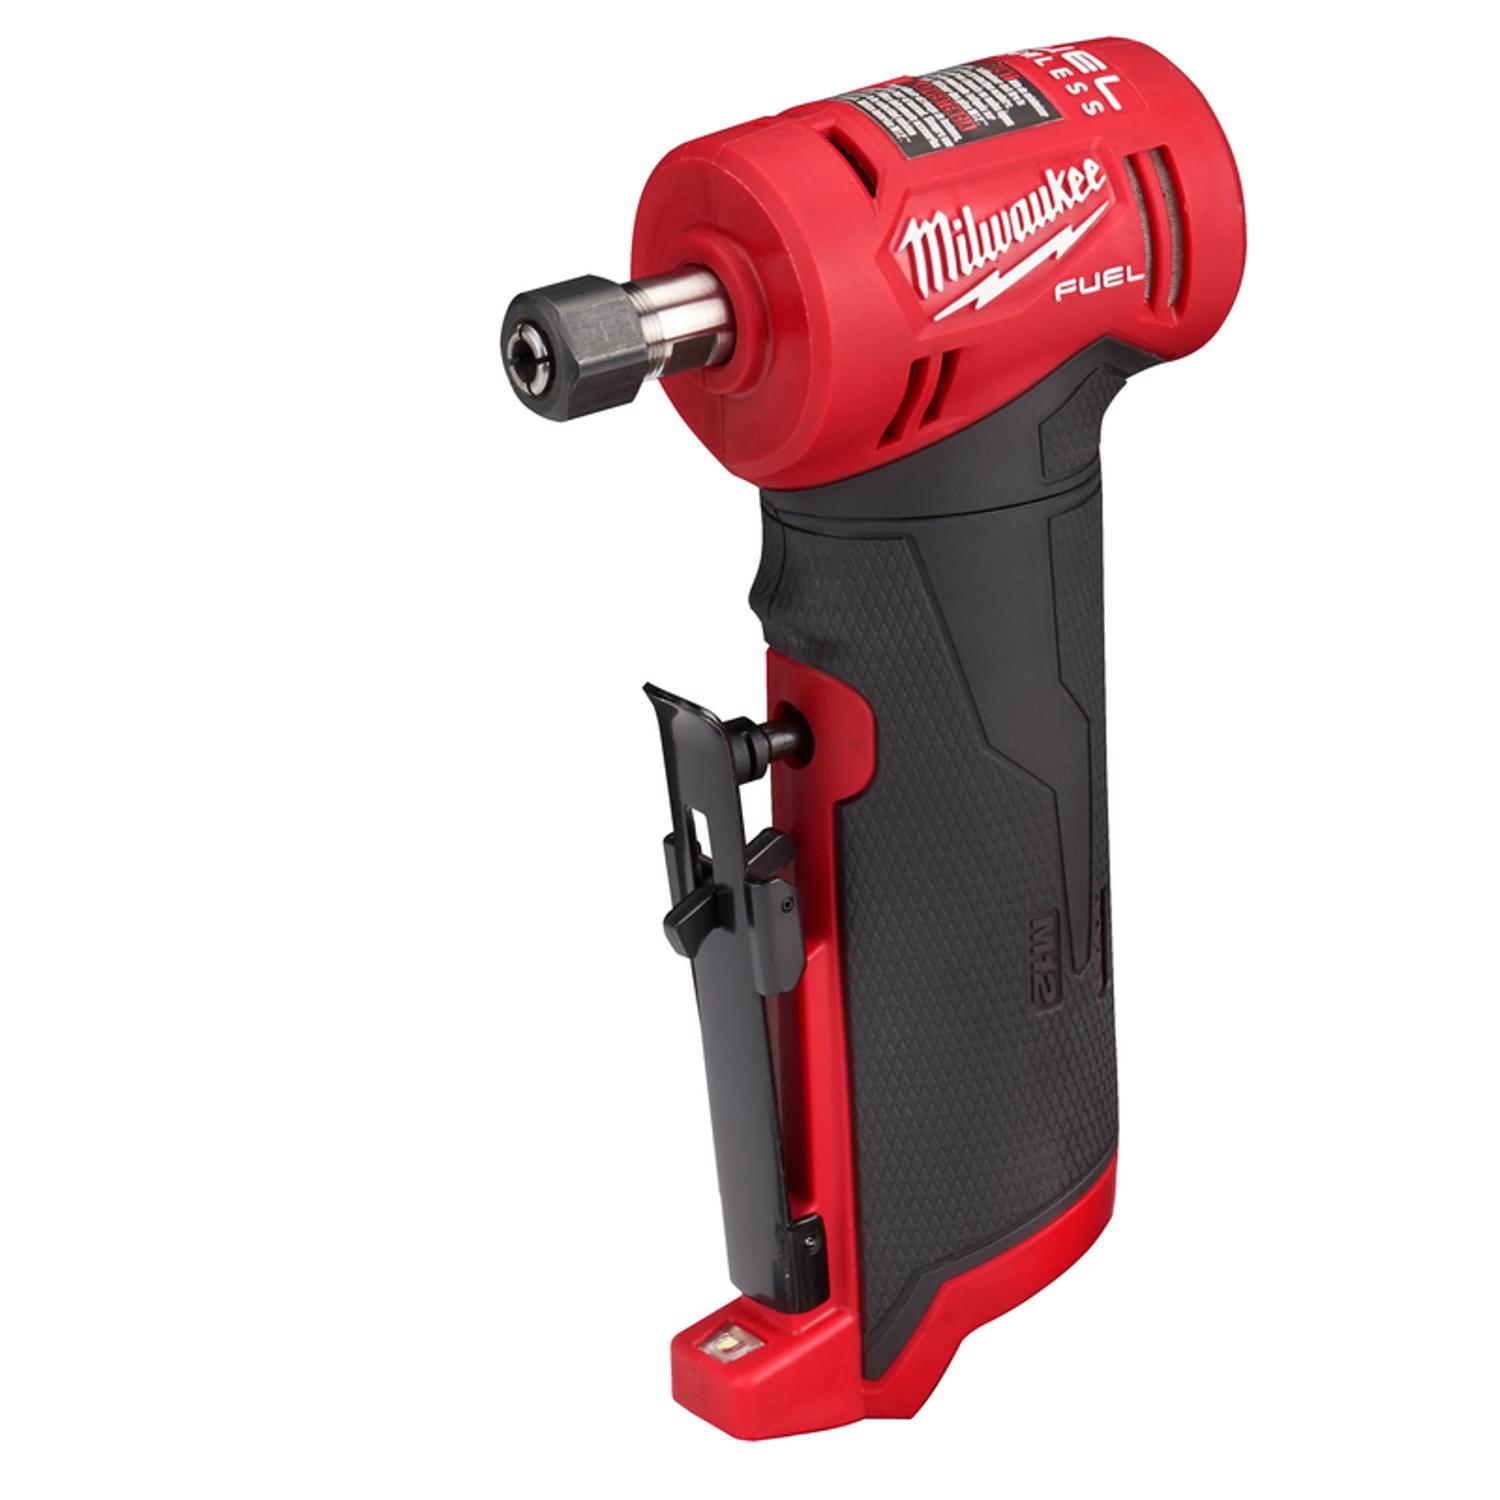 Photos - Grinder / Polisher Milwaukee M12 FUEL Brushless Cordless 1/4 in. Right Angle Die Grinder Tool 